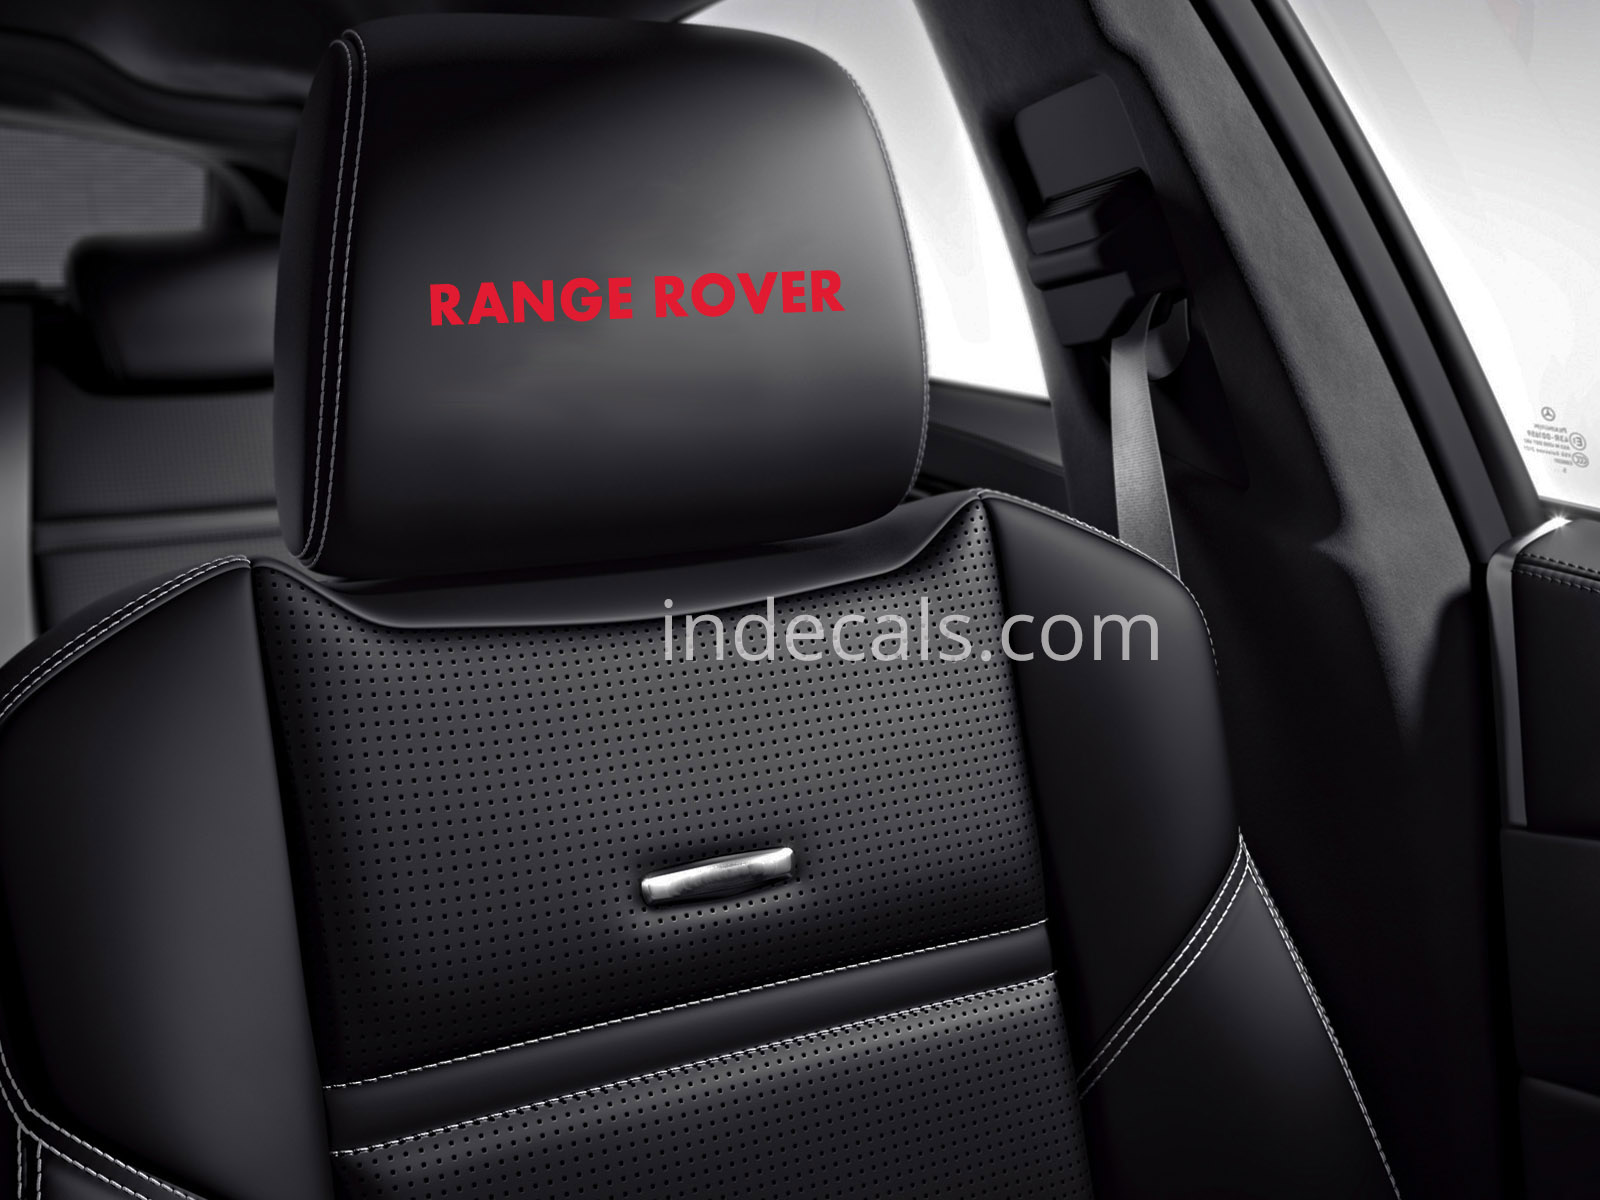 6 x Range Rover Stickers for Headrests - Red